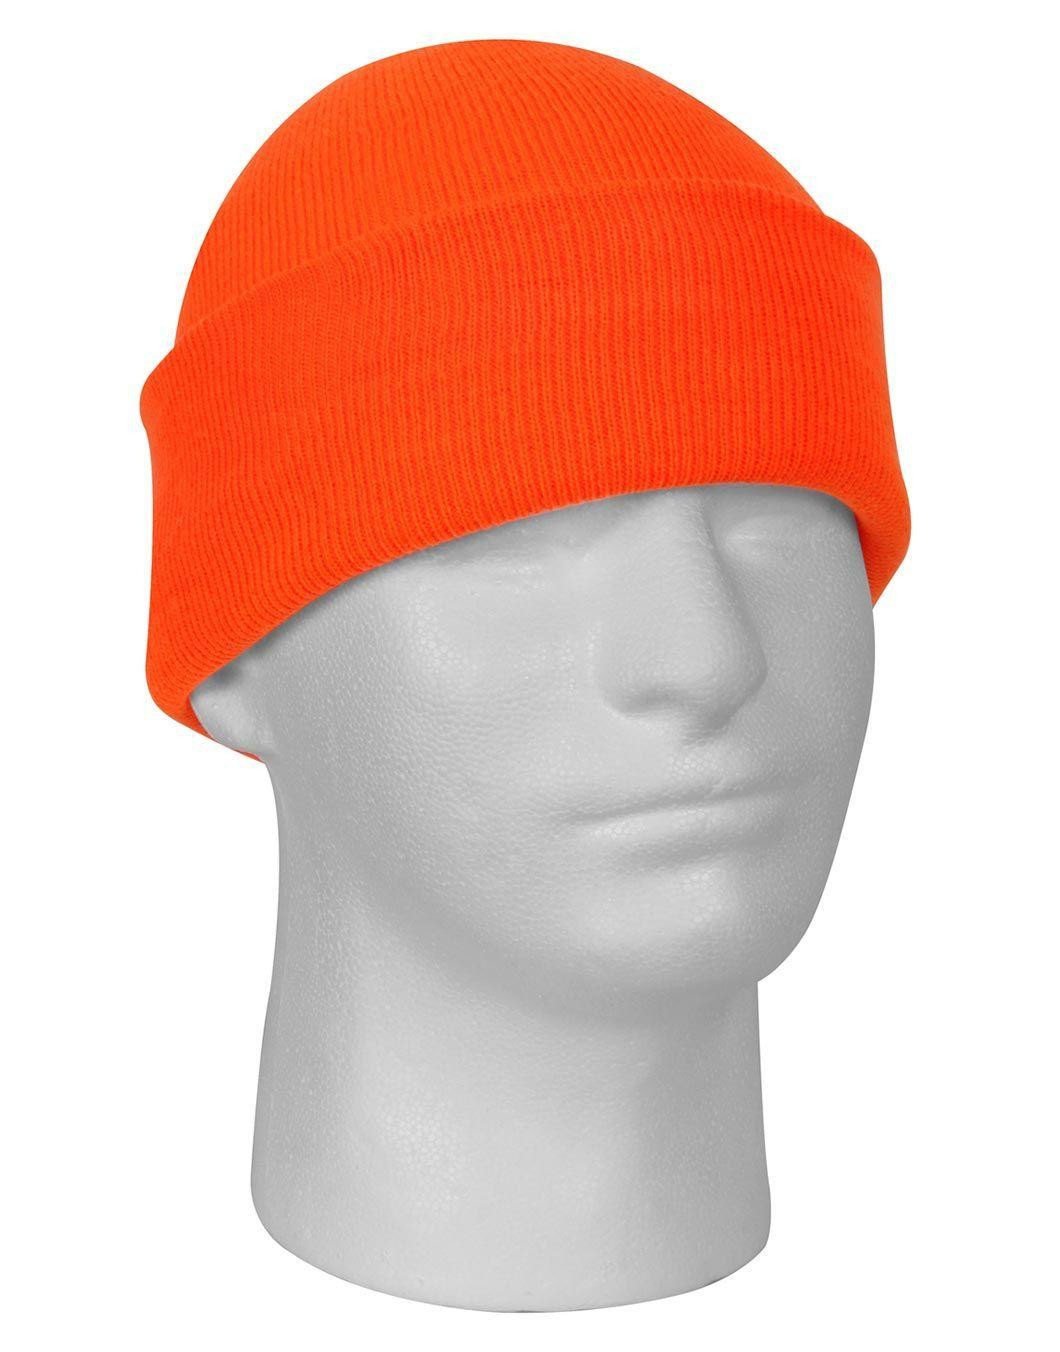 Rothco Deluxe Strikket Watch Cap (Safety Orange, One Size)